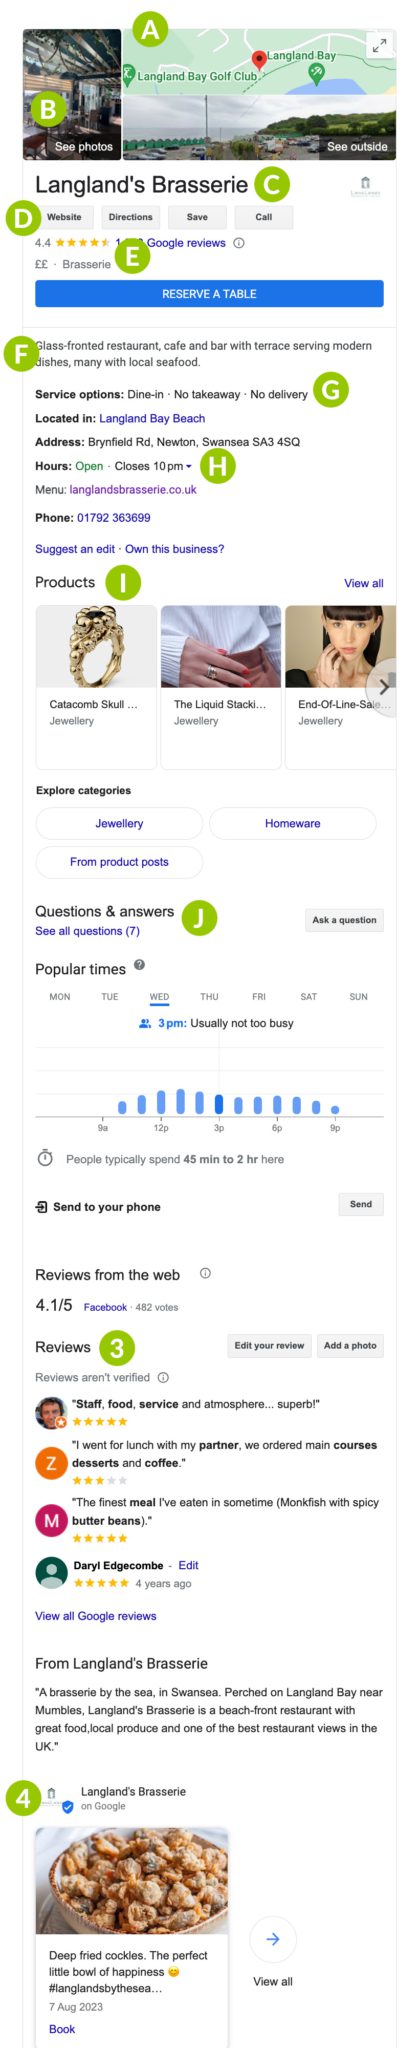 anatomy of a google business profile and the information you can add